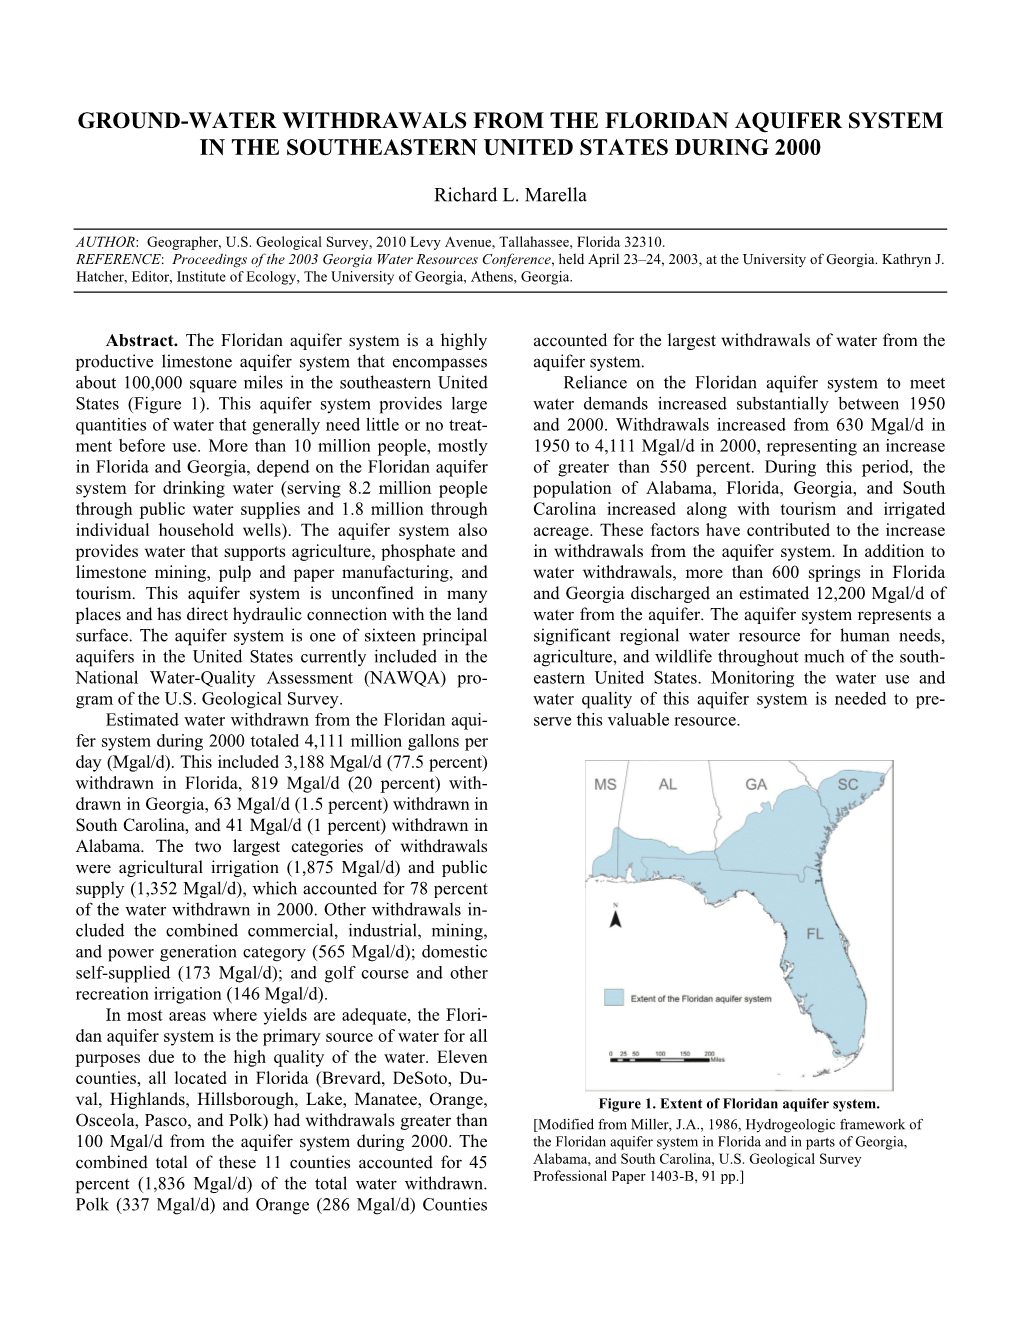 Ground-Water Wtihdrawals from the Floridan Aquifer System in the Southeastern United States During 2000